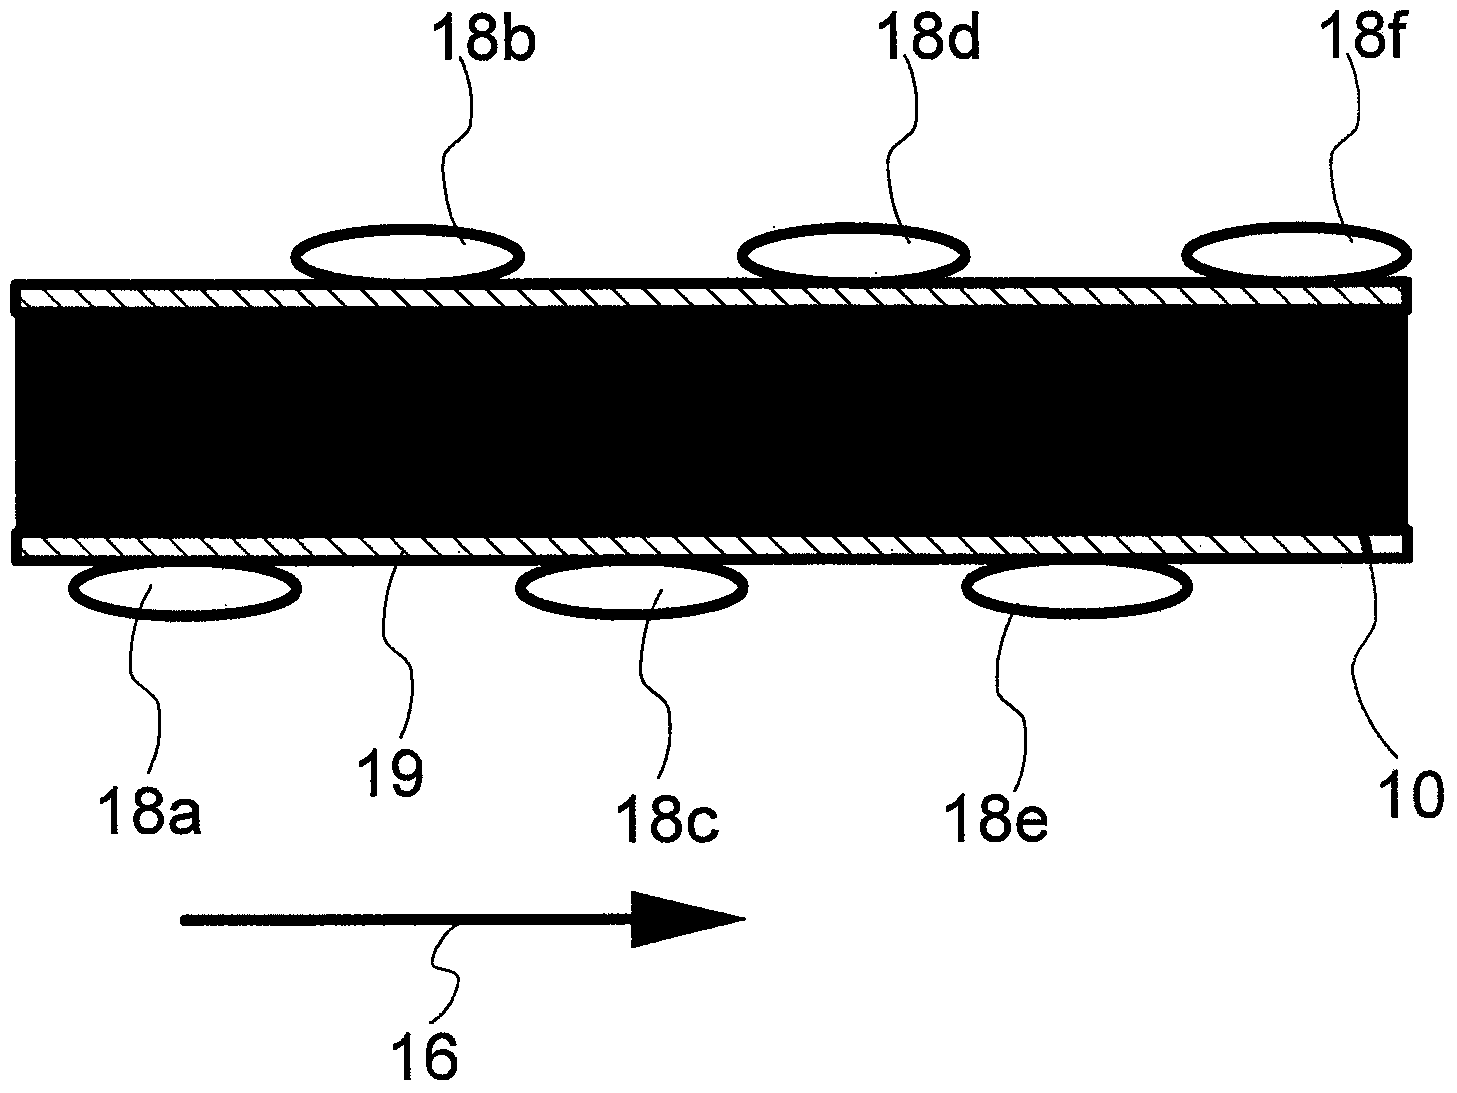 Photovoltaic system and connector for a photovoltaic cell with interdigitated contacts